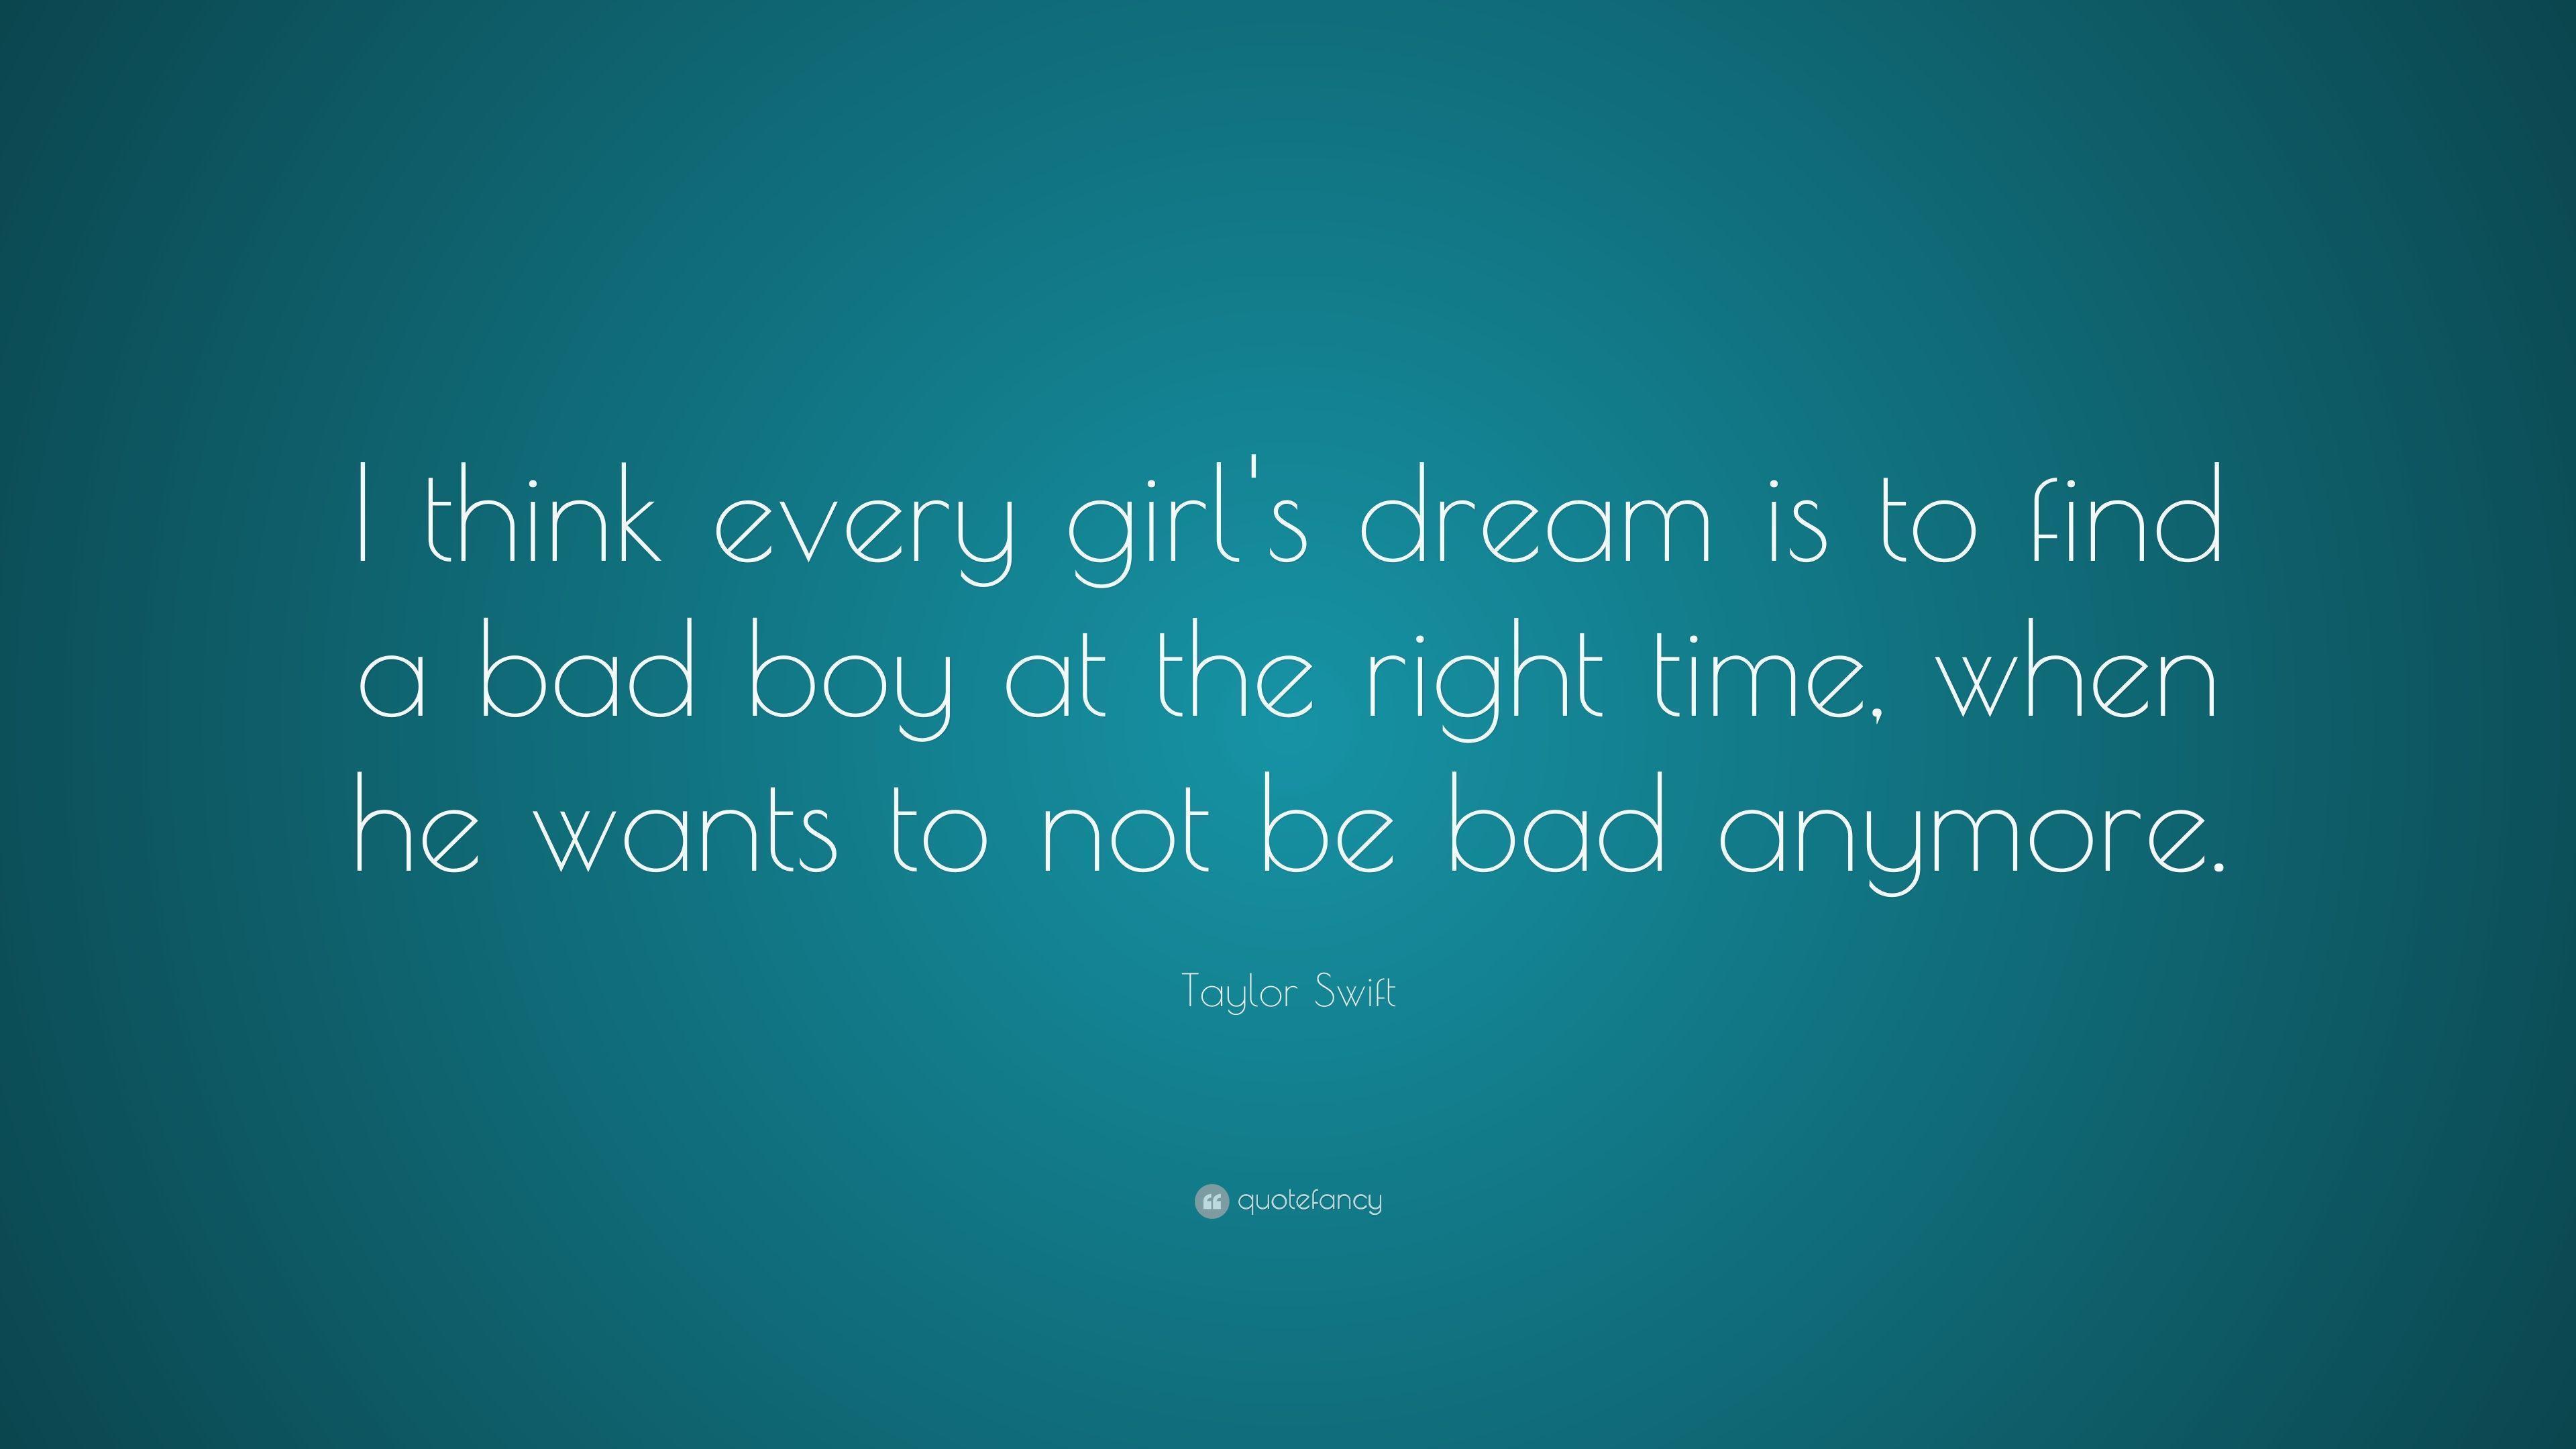 Taylor Swift Quote: “I think every girl's dream is to find a bad